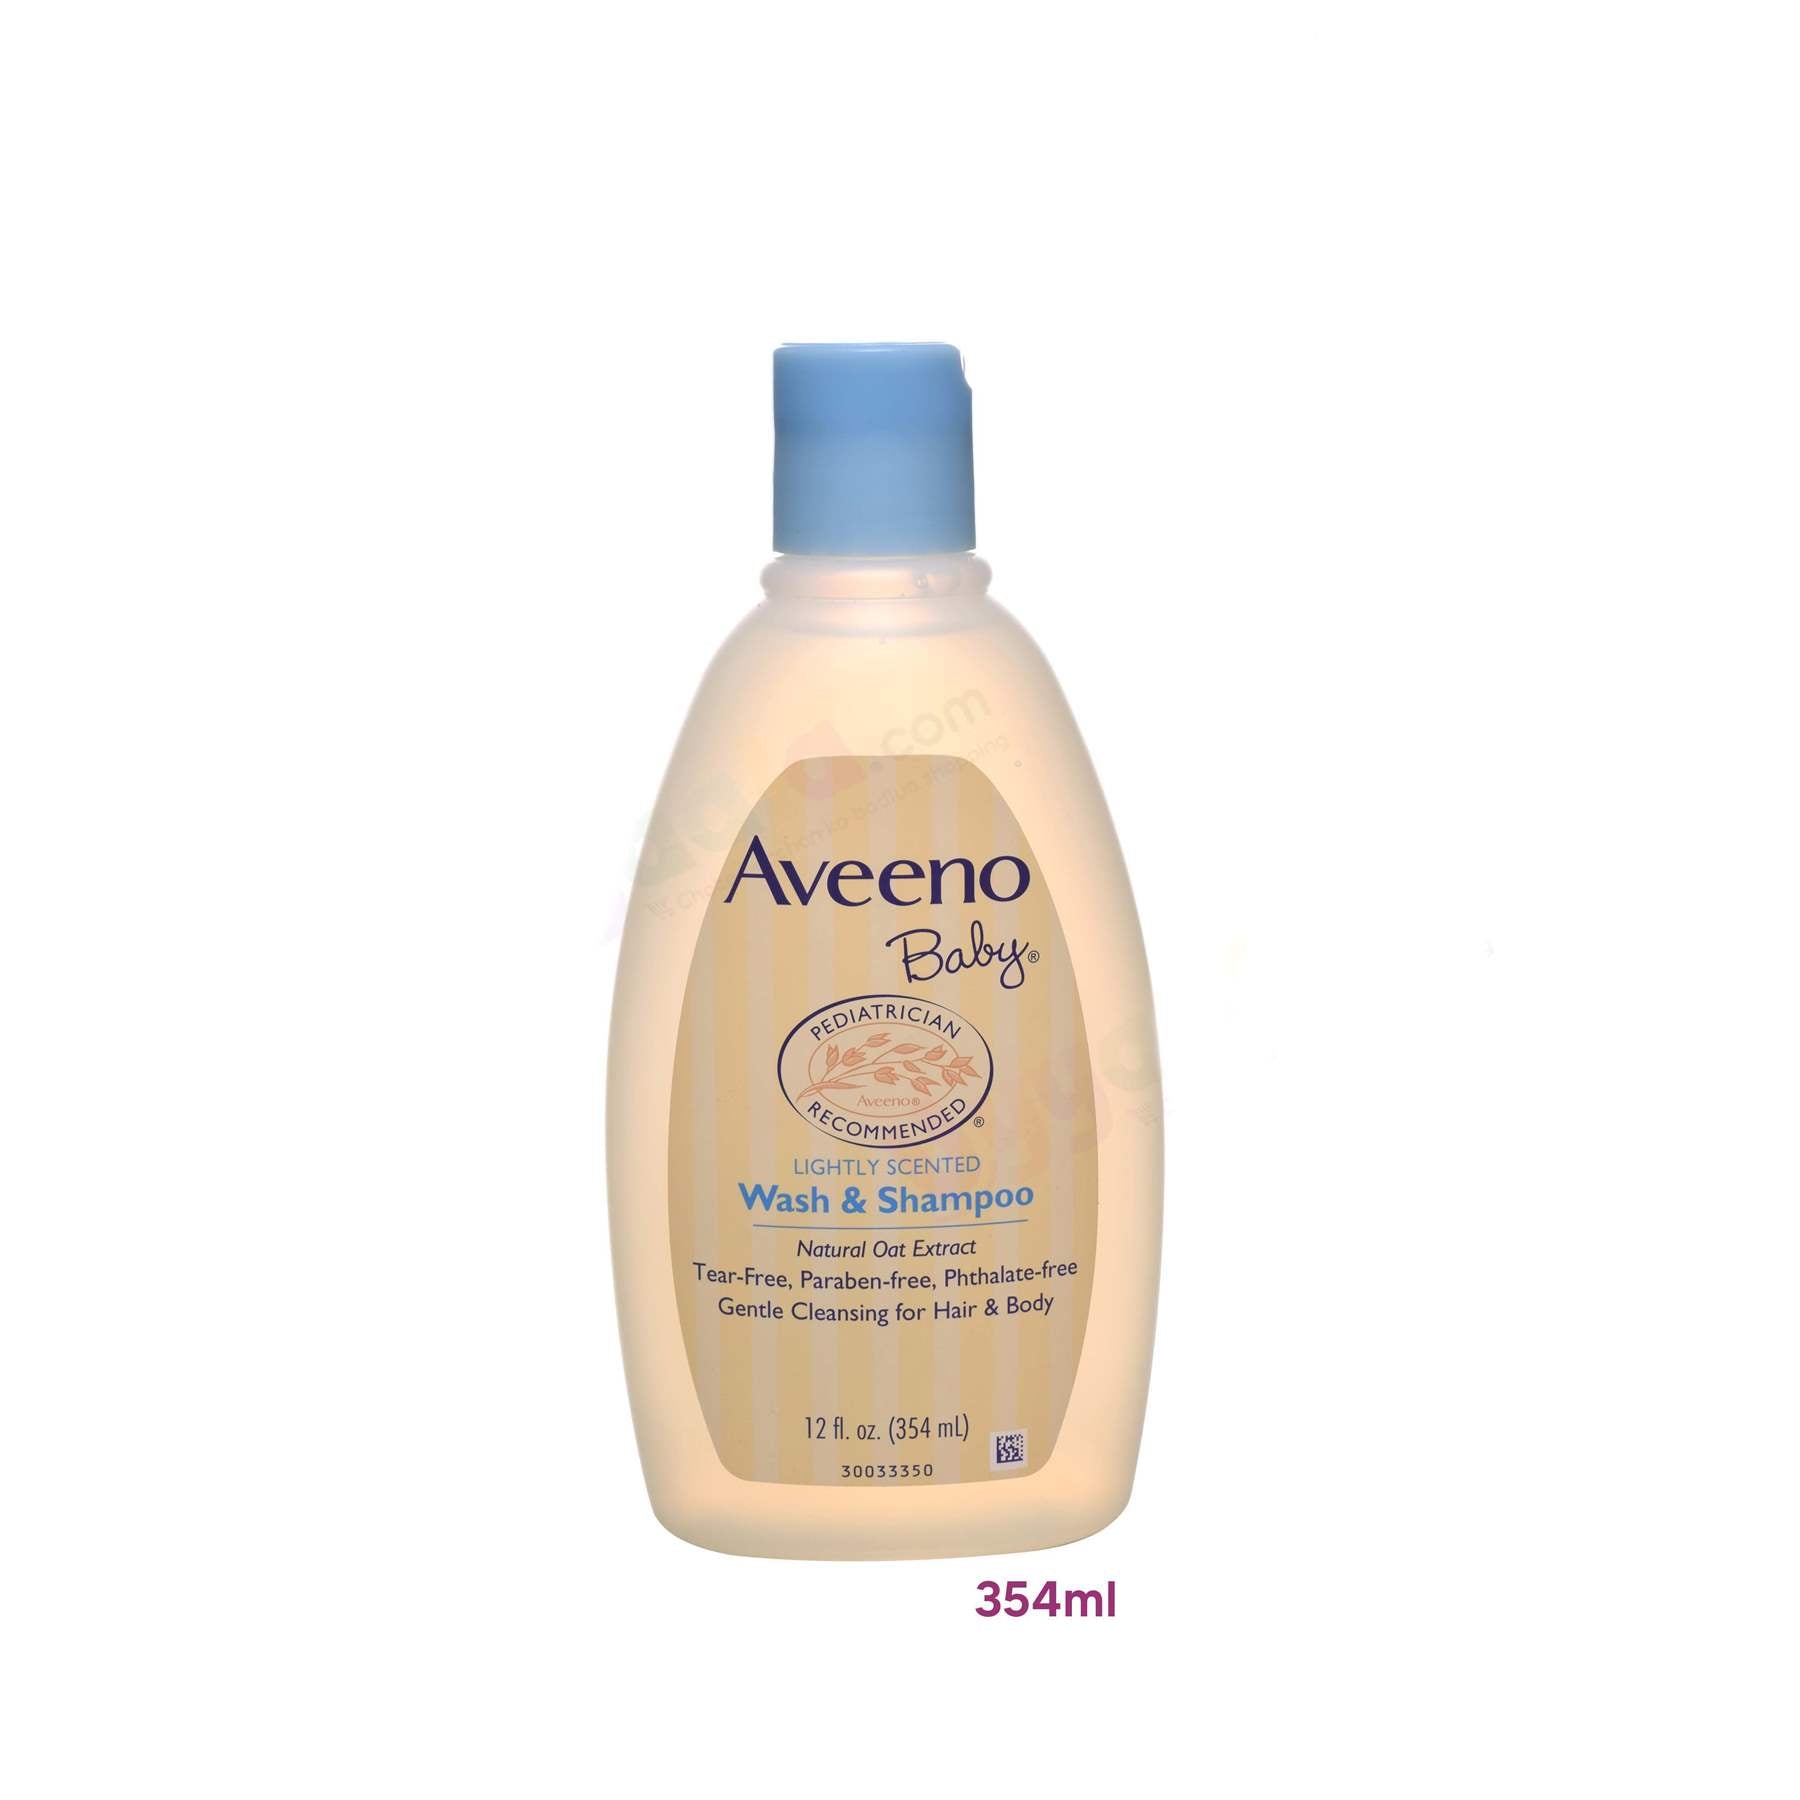 AVEENO BABY Wash & shampoo, natural oat extract - lightly scented ,354 ml